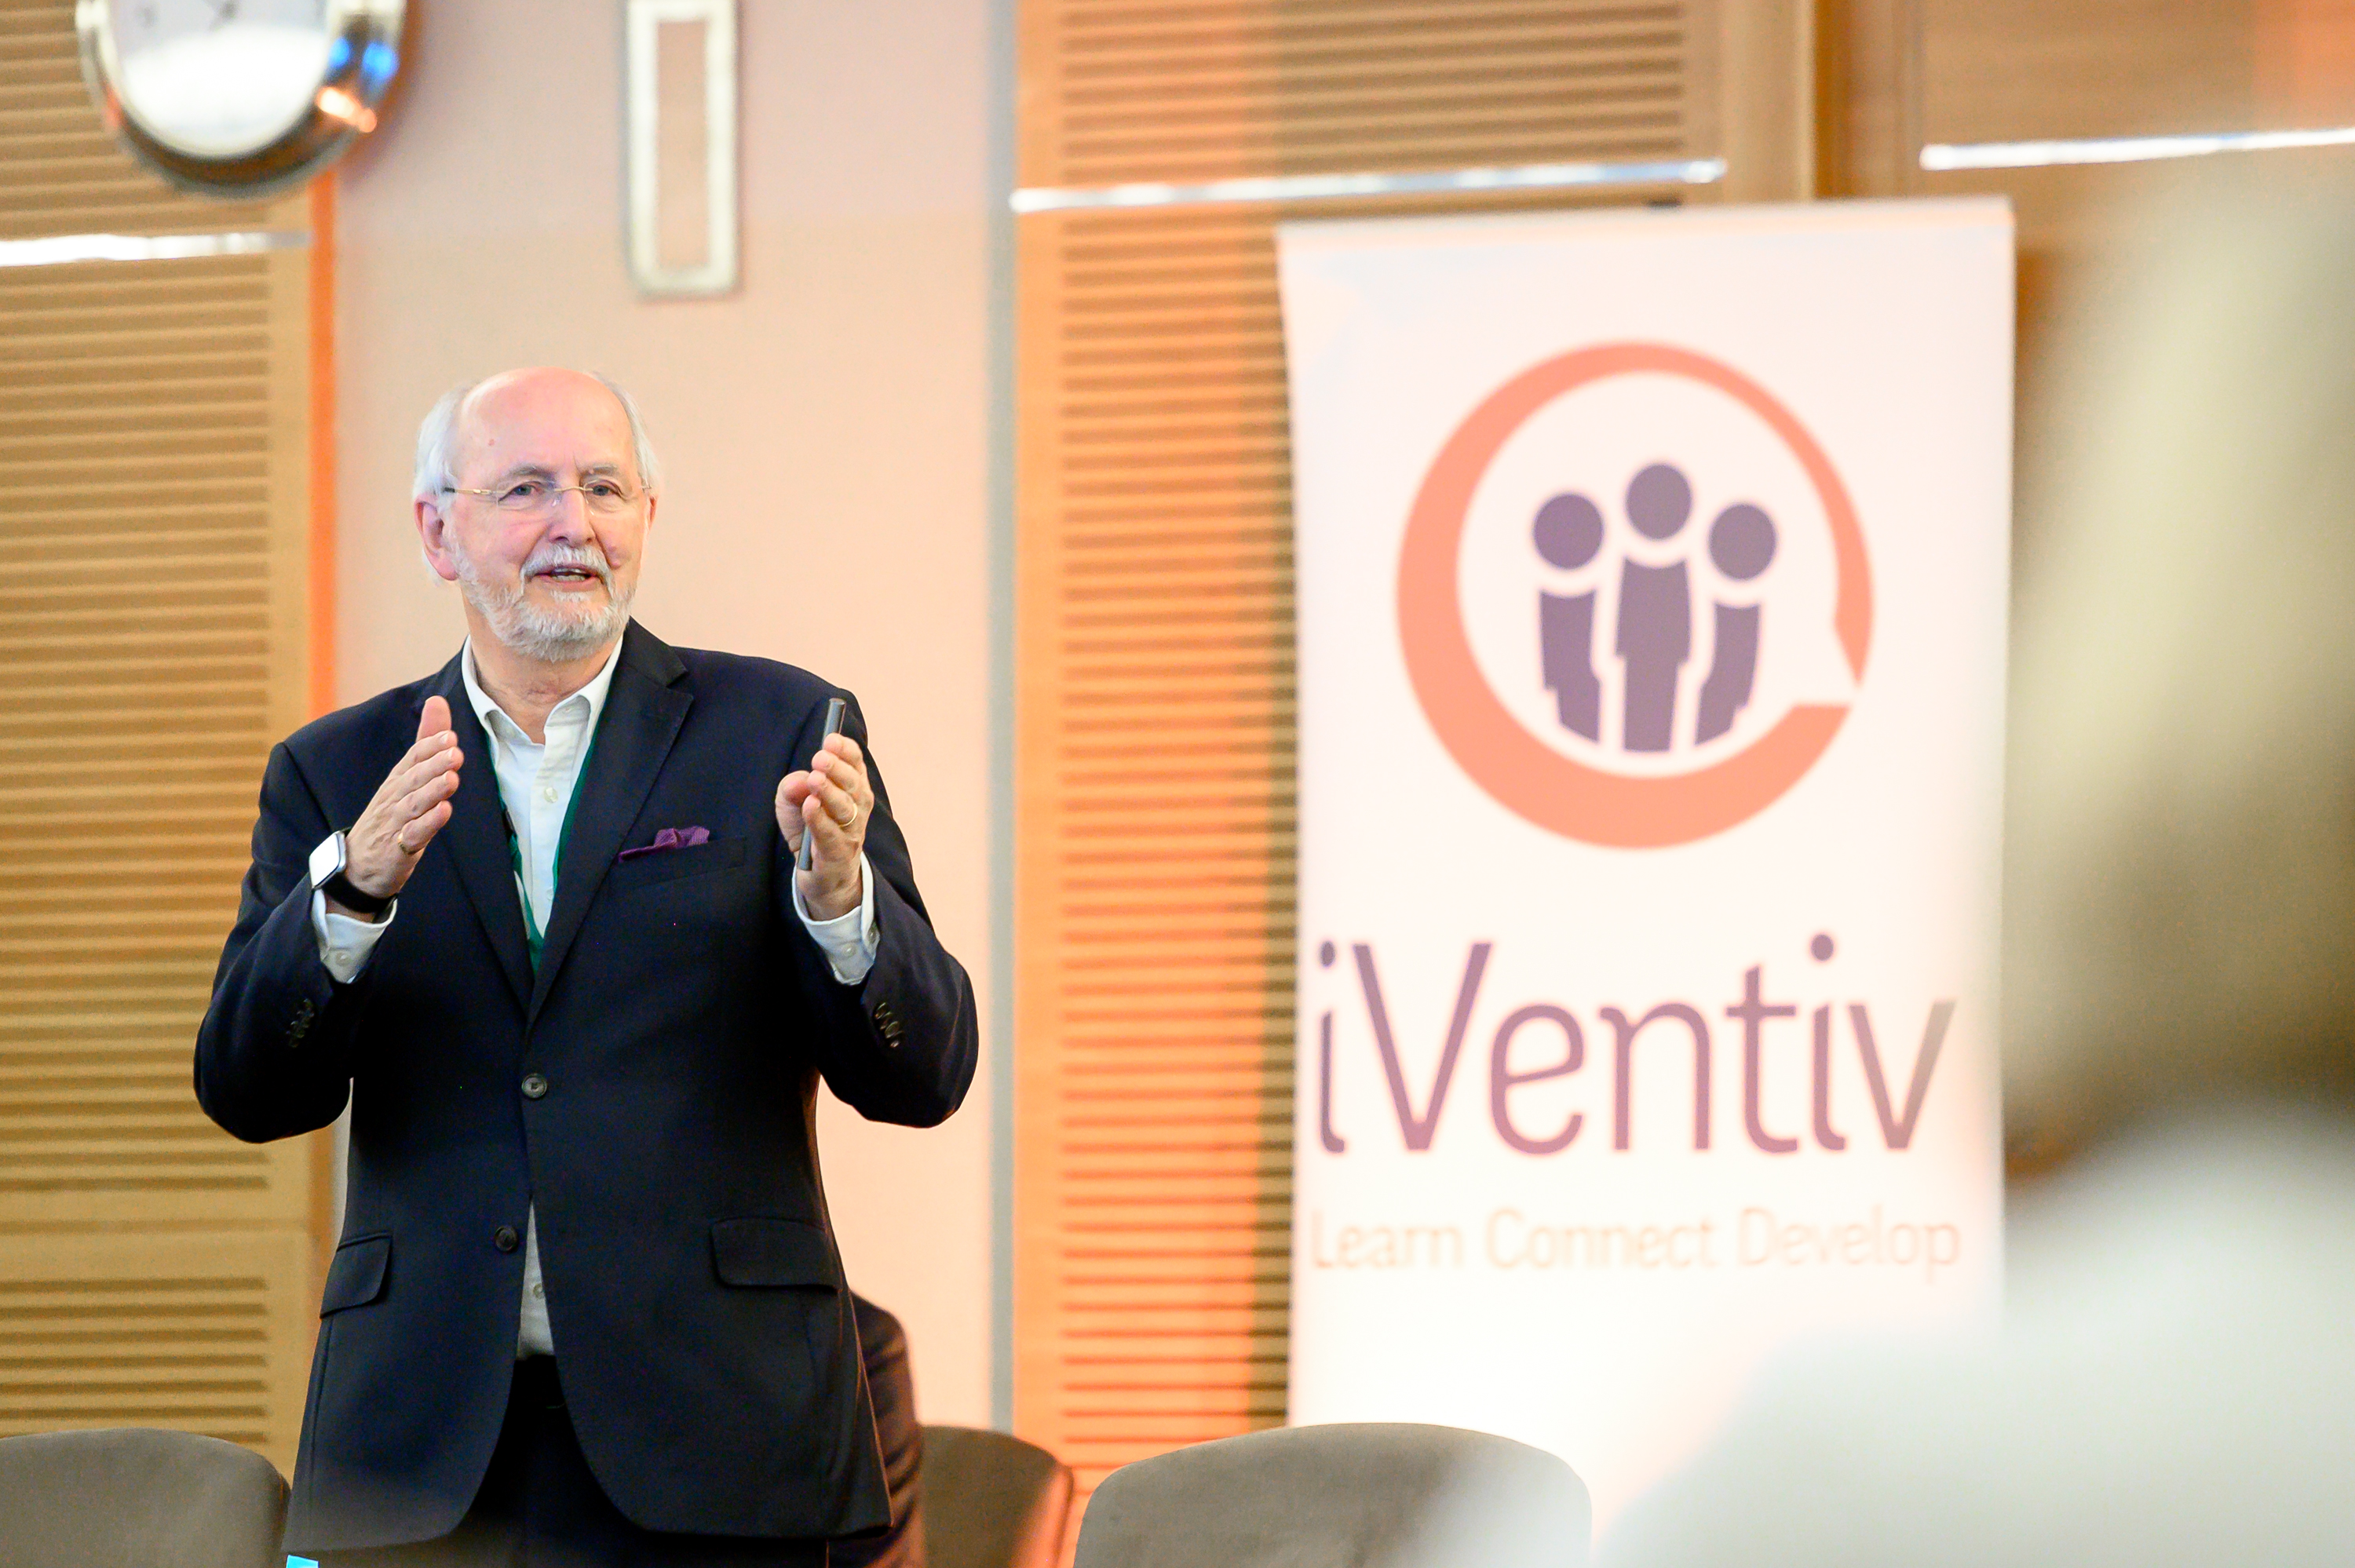 Charles Jennings speaks at an iVentiv event